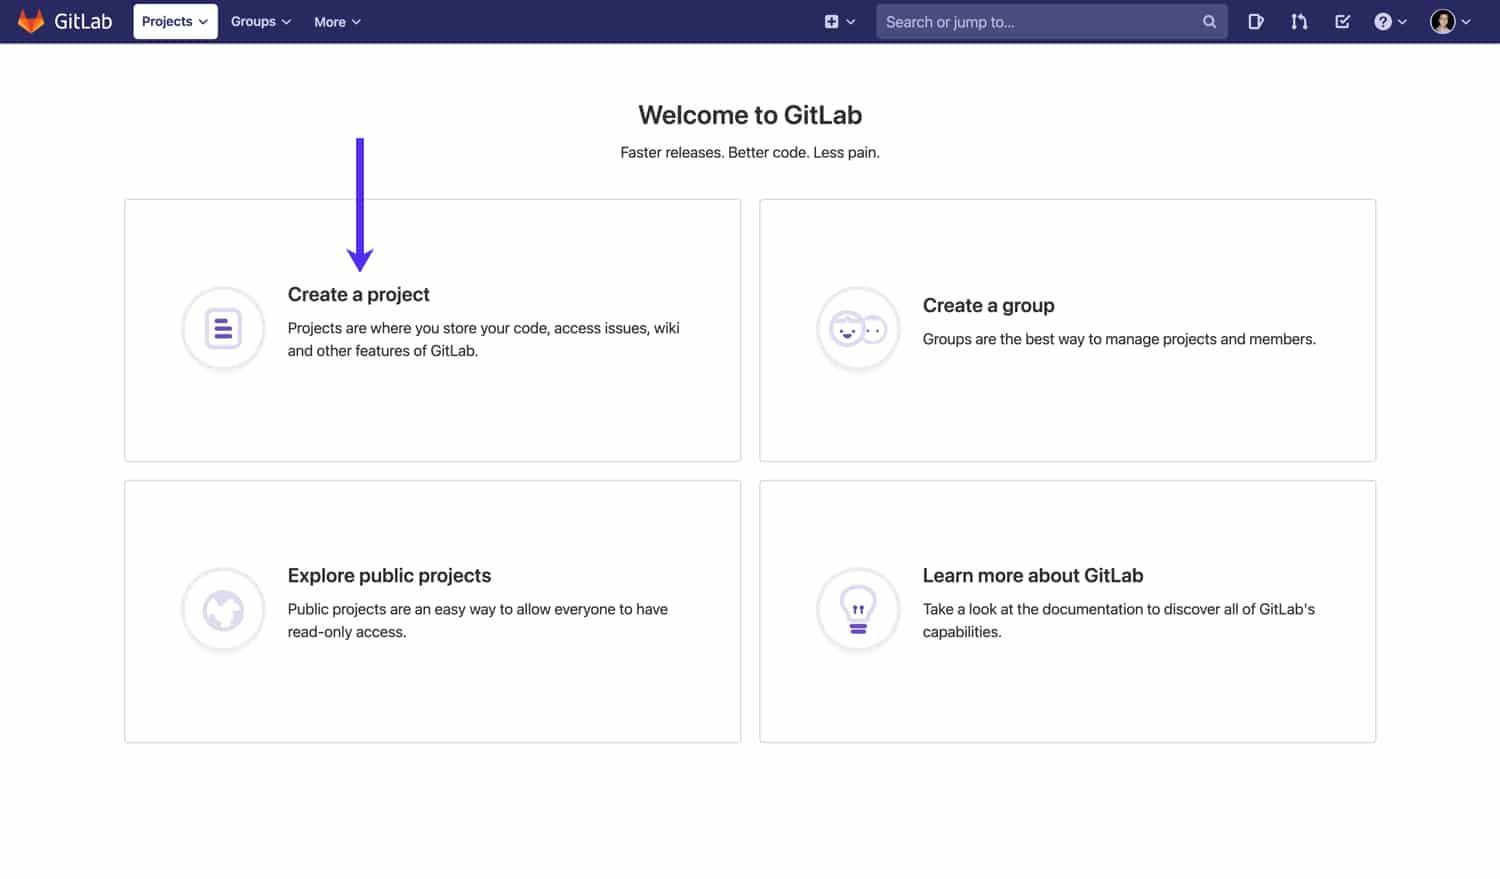 Create a project in GitLab.